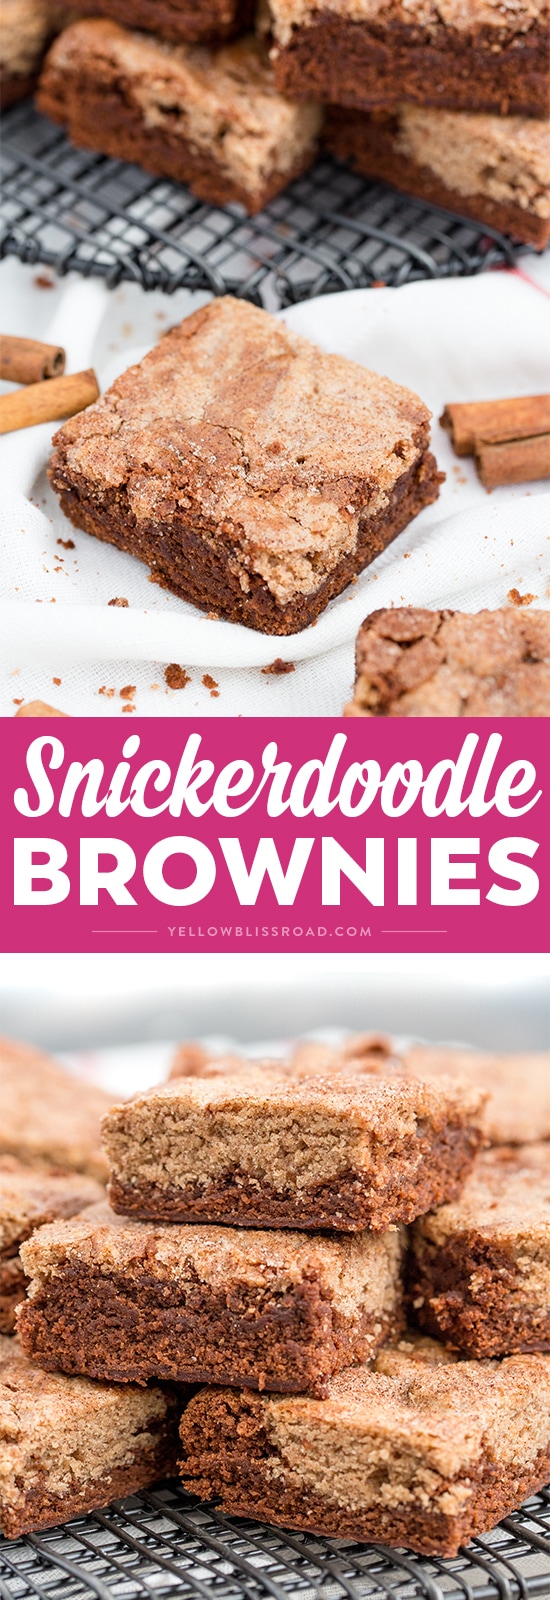 Snickerdoodle Brownies are the best of both worlds - fudgy, chocolatey brownies mixed with warm, cinnamon Snickerdoodles! It's the ultimate classic mash-up dessert!